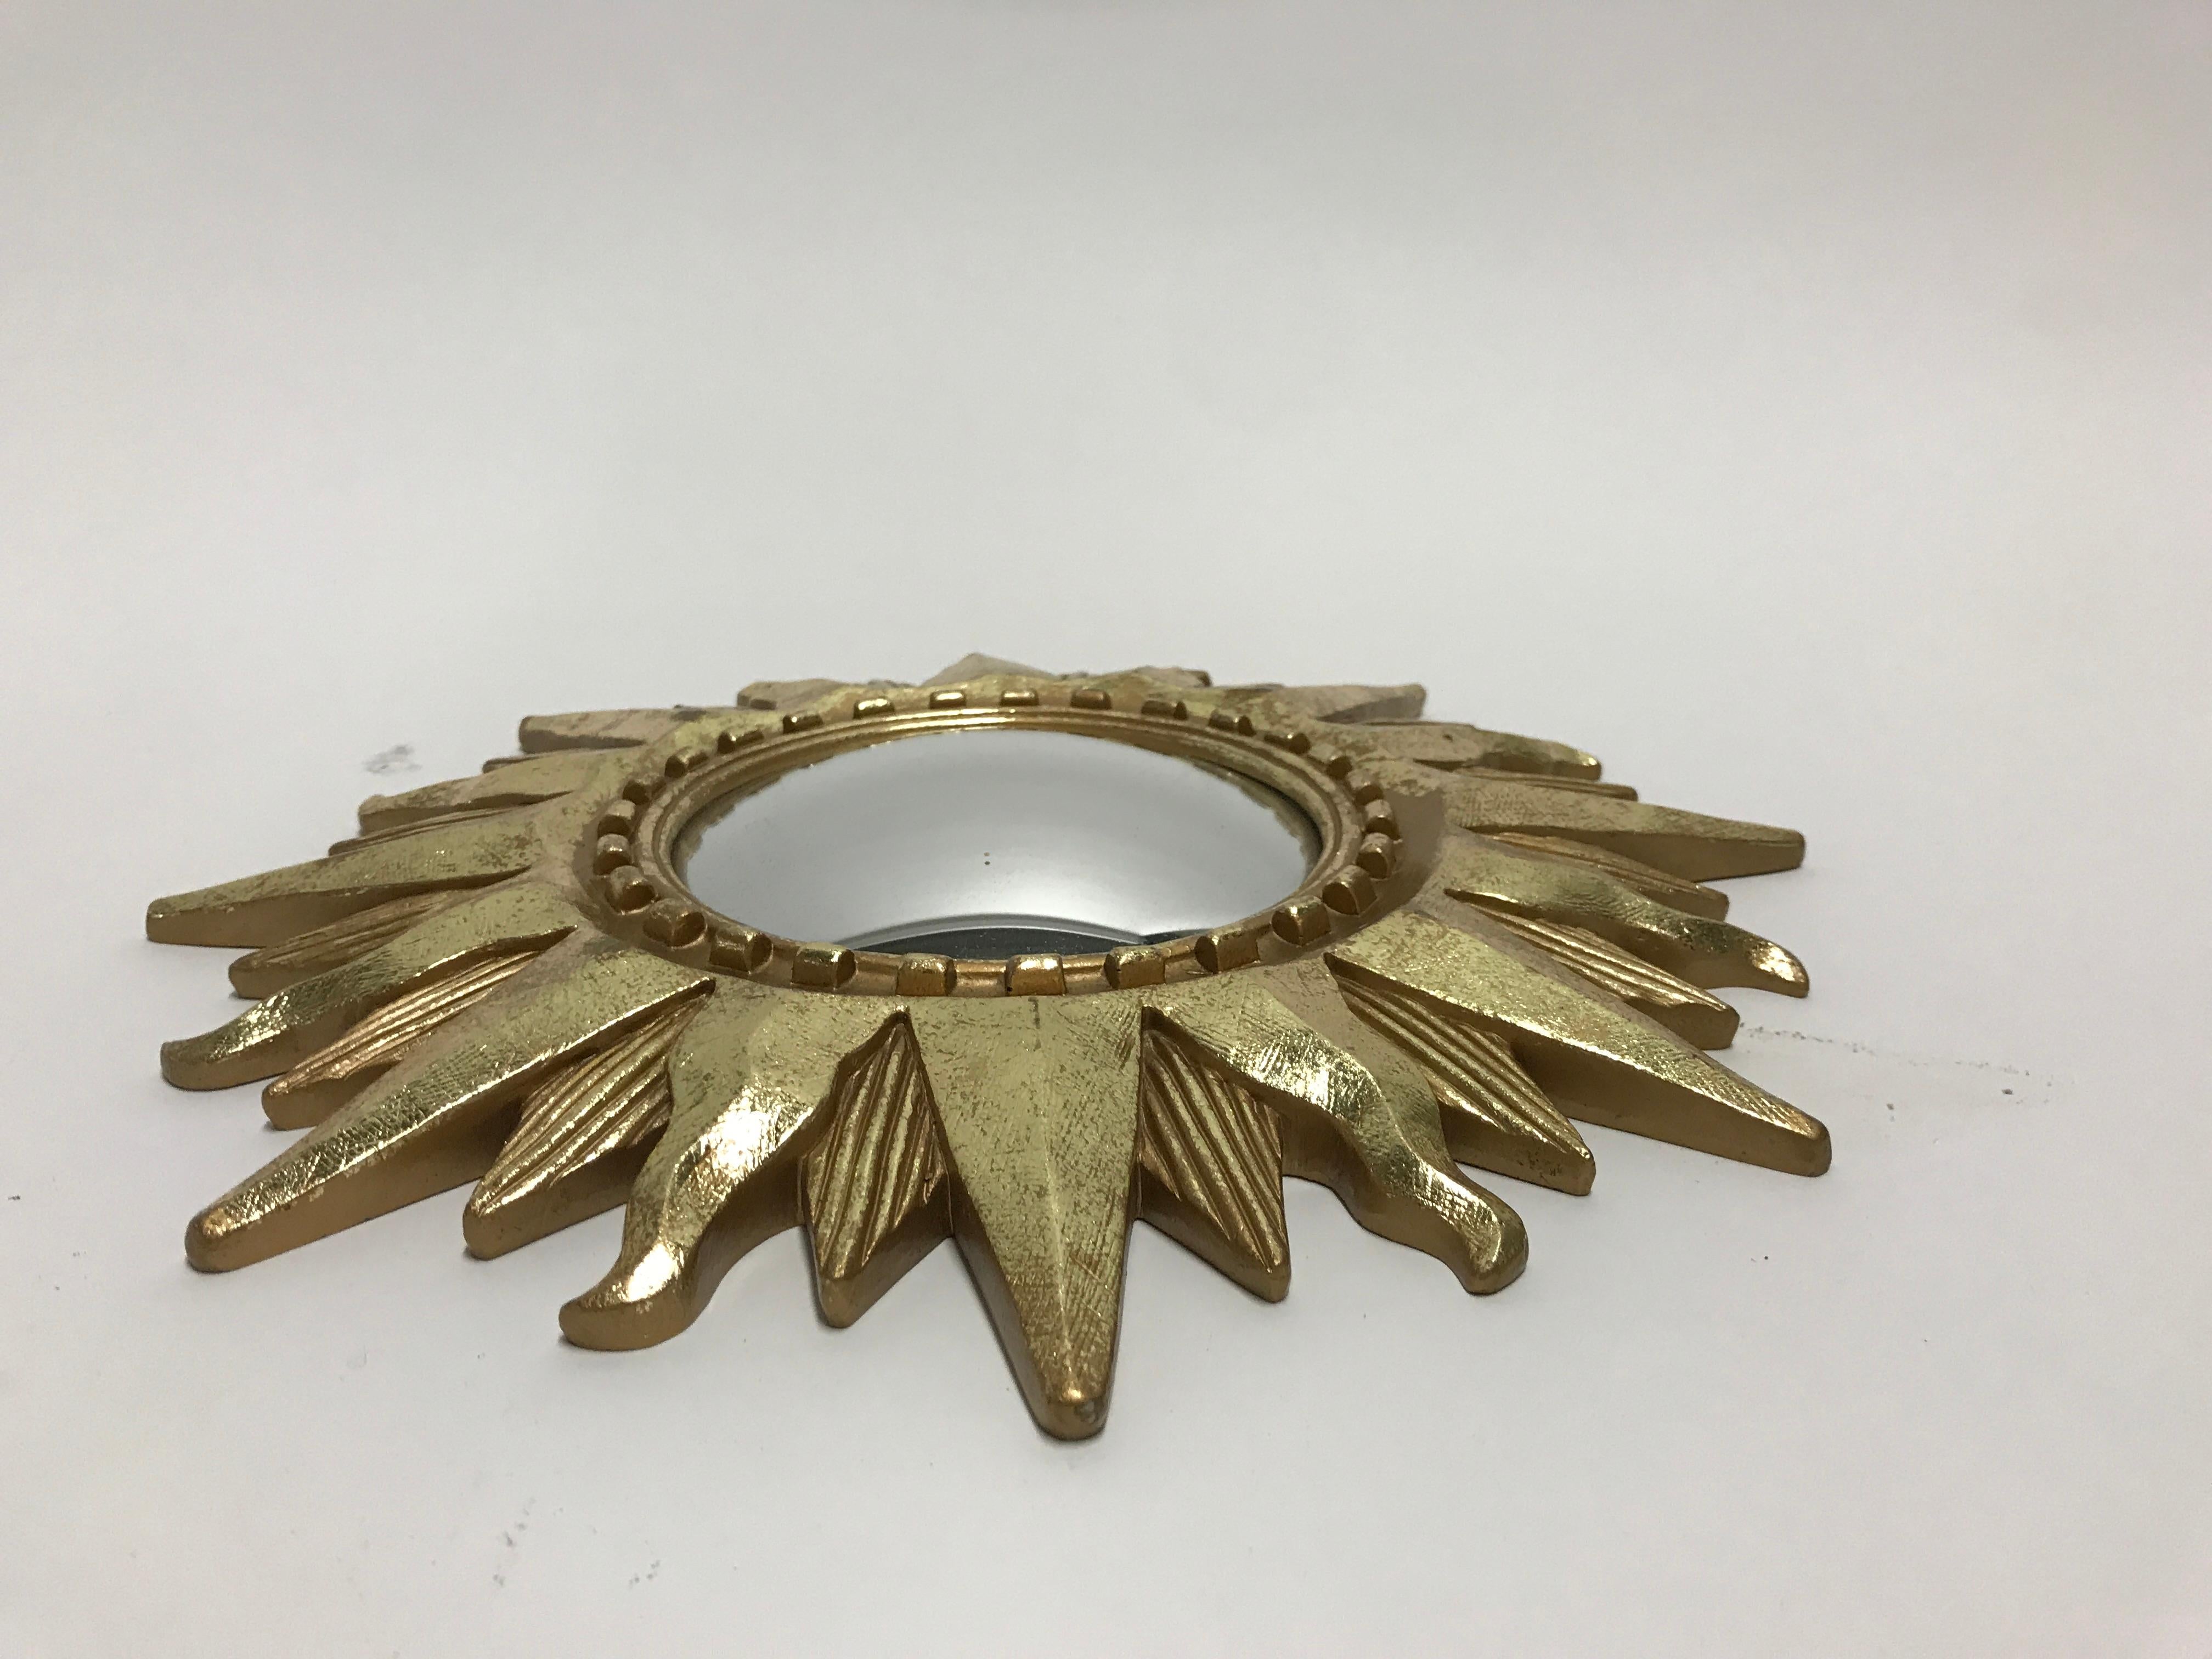 Small gilded resin sunburst mirror with convex mirror glass.

The golden mirror is in a very good condition.

Great as a single piece or to add to a collection to fill the wall!

1970s - France

Pristine